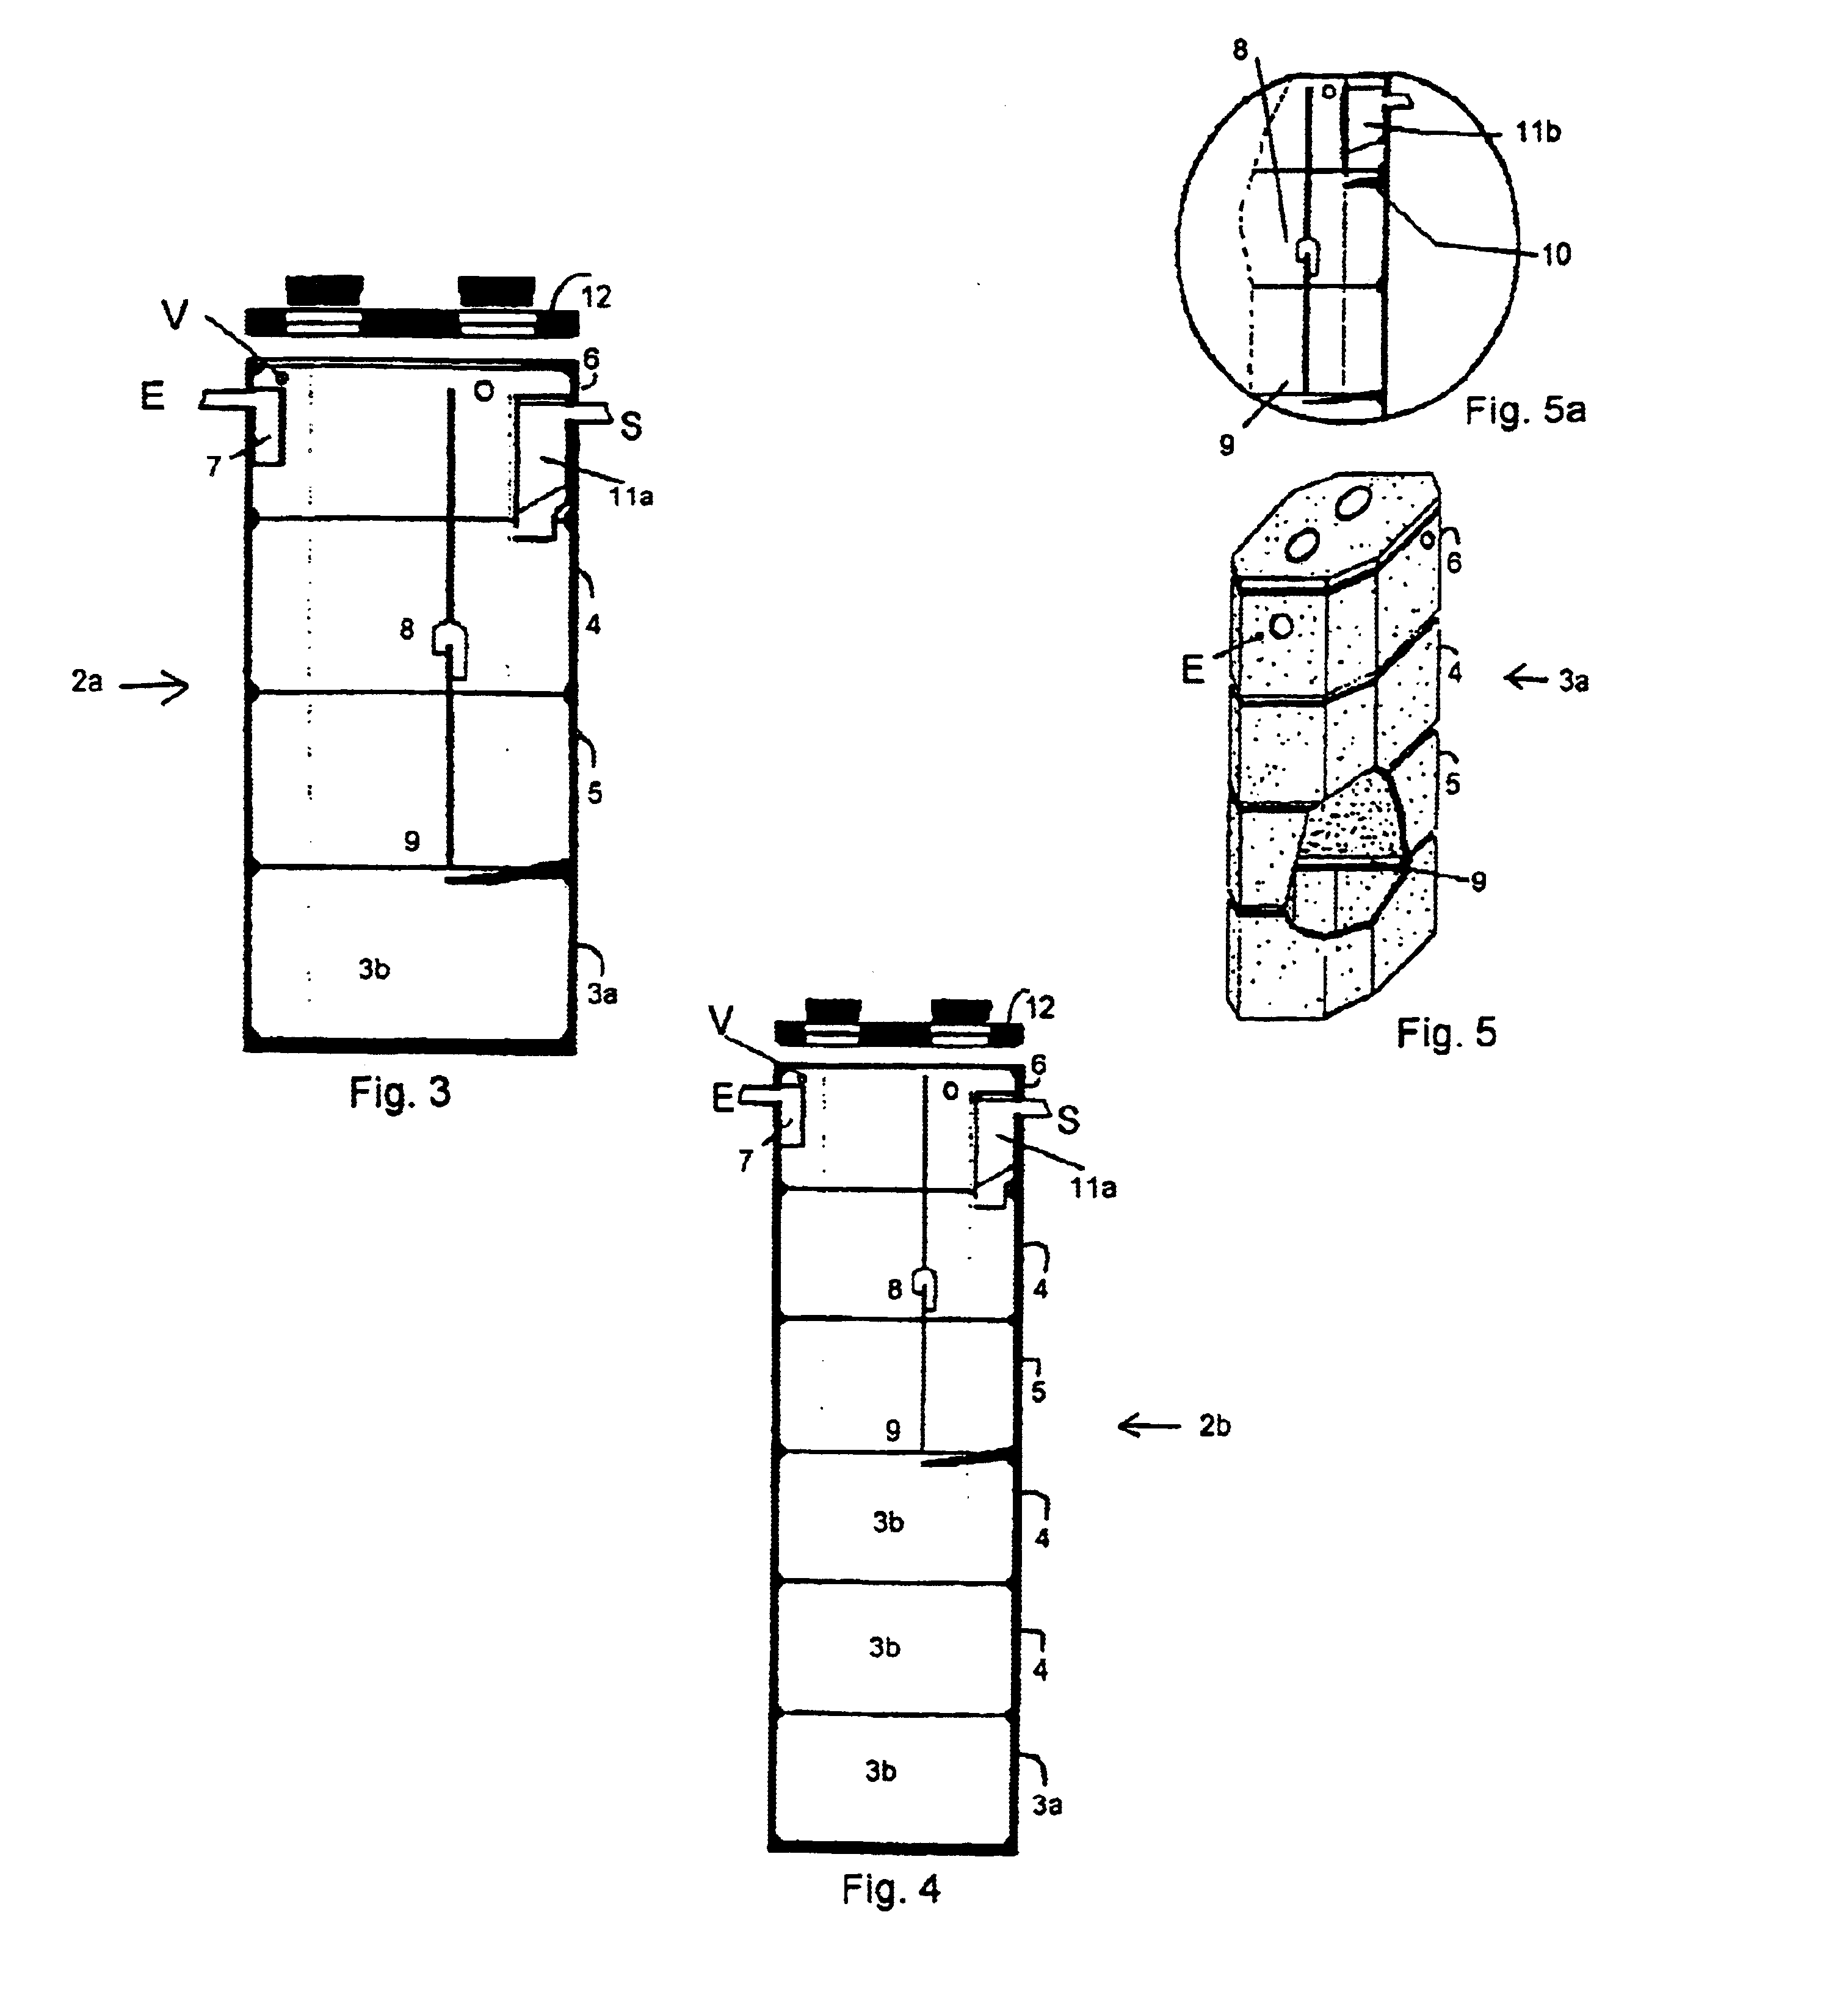 Prefabricated biological purification system